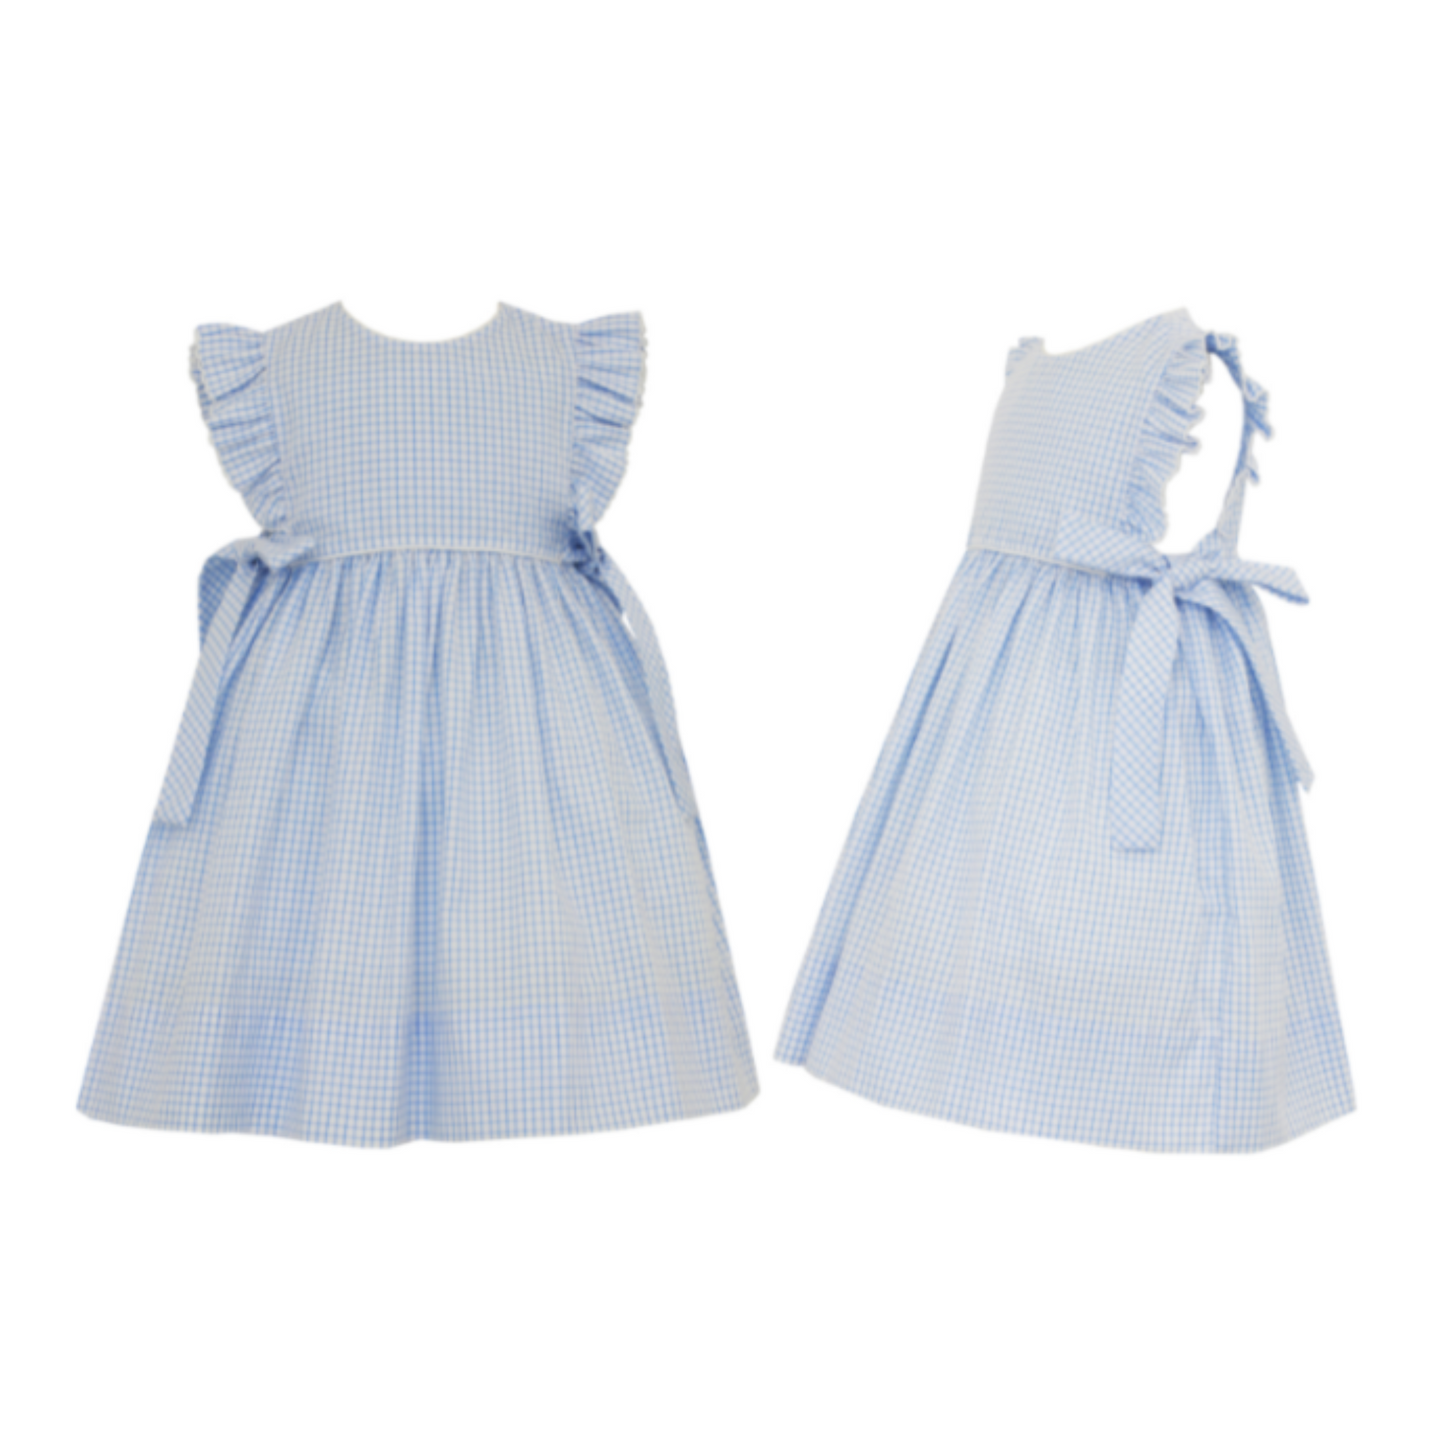 Blue and White Gingham Check Dress with Bows